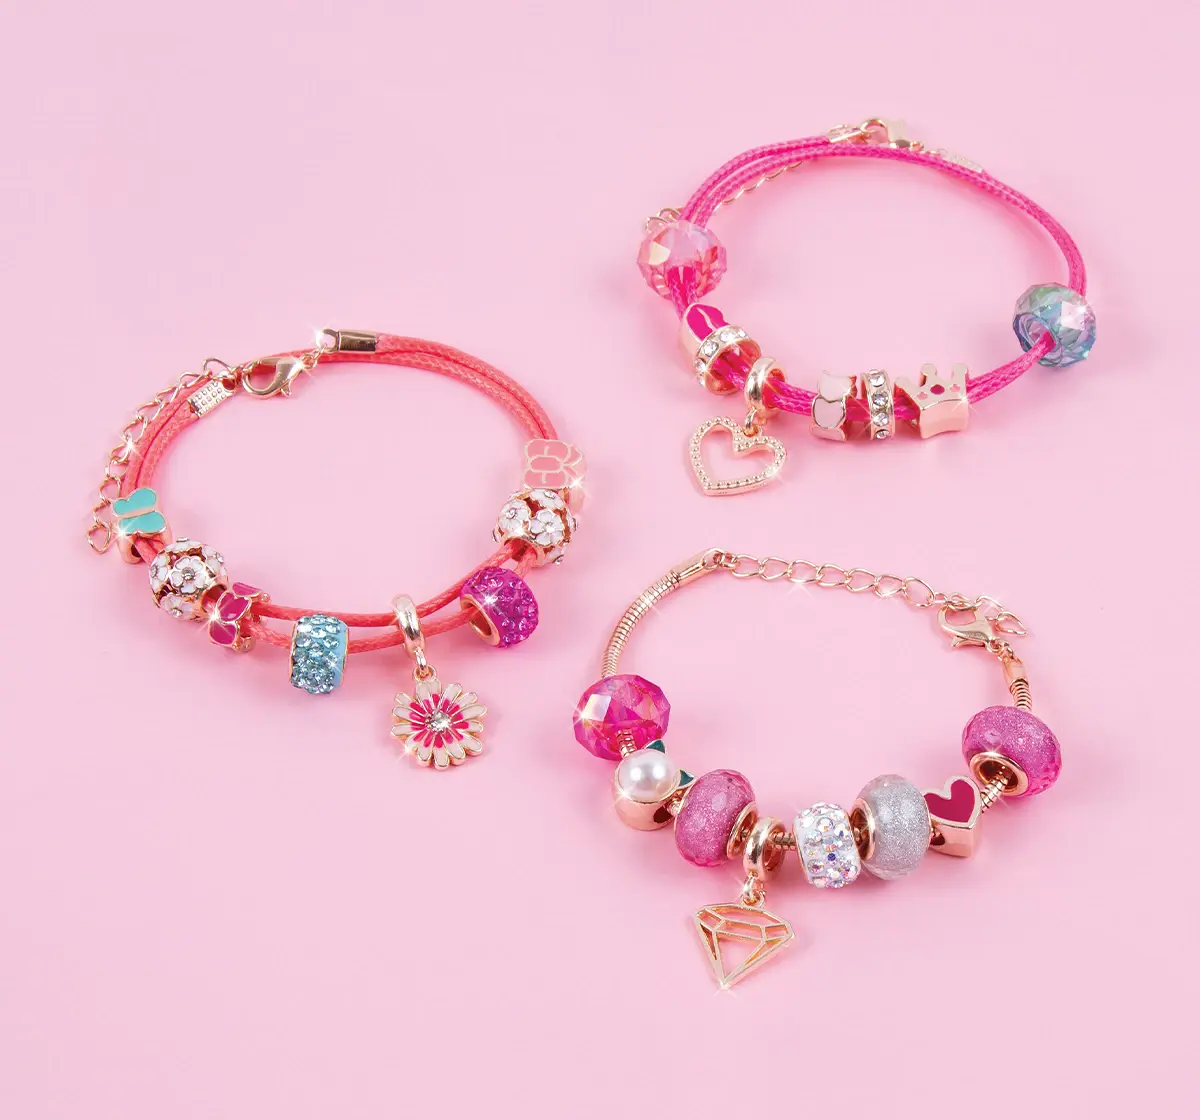 Make It Real Halo Charms Think Pink Multicolour, 8Y+